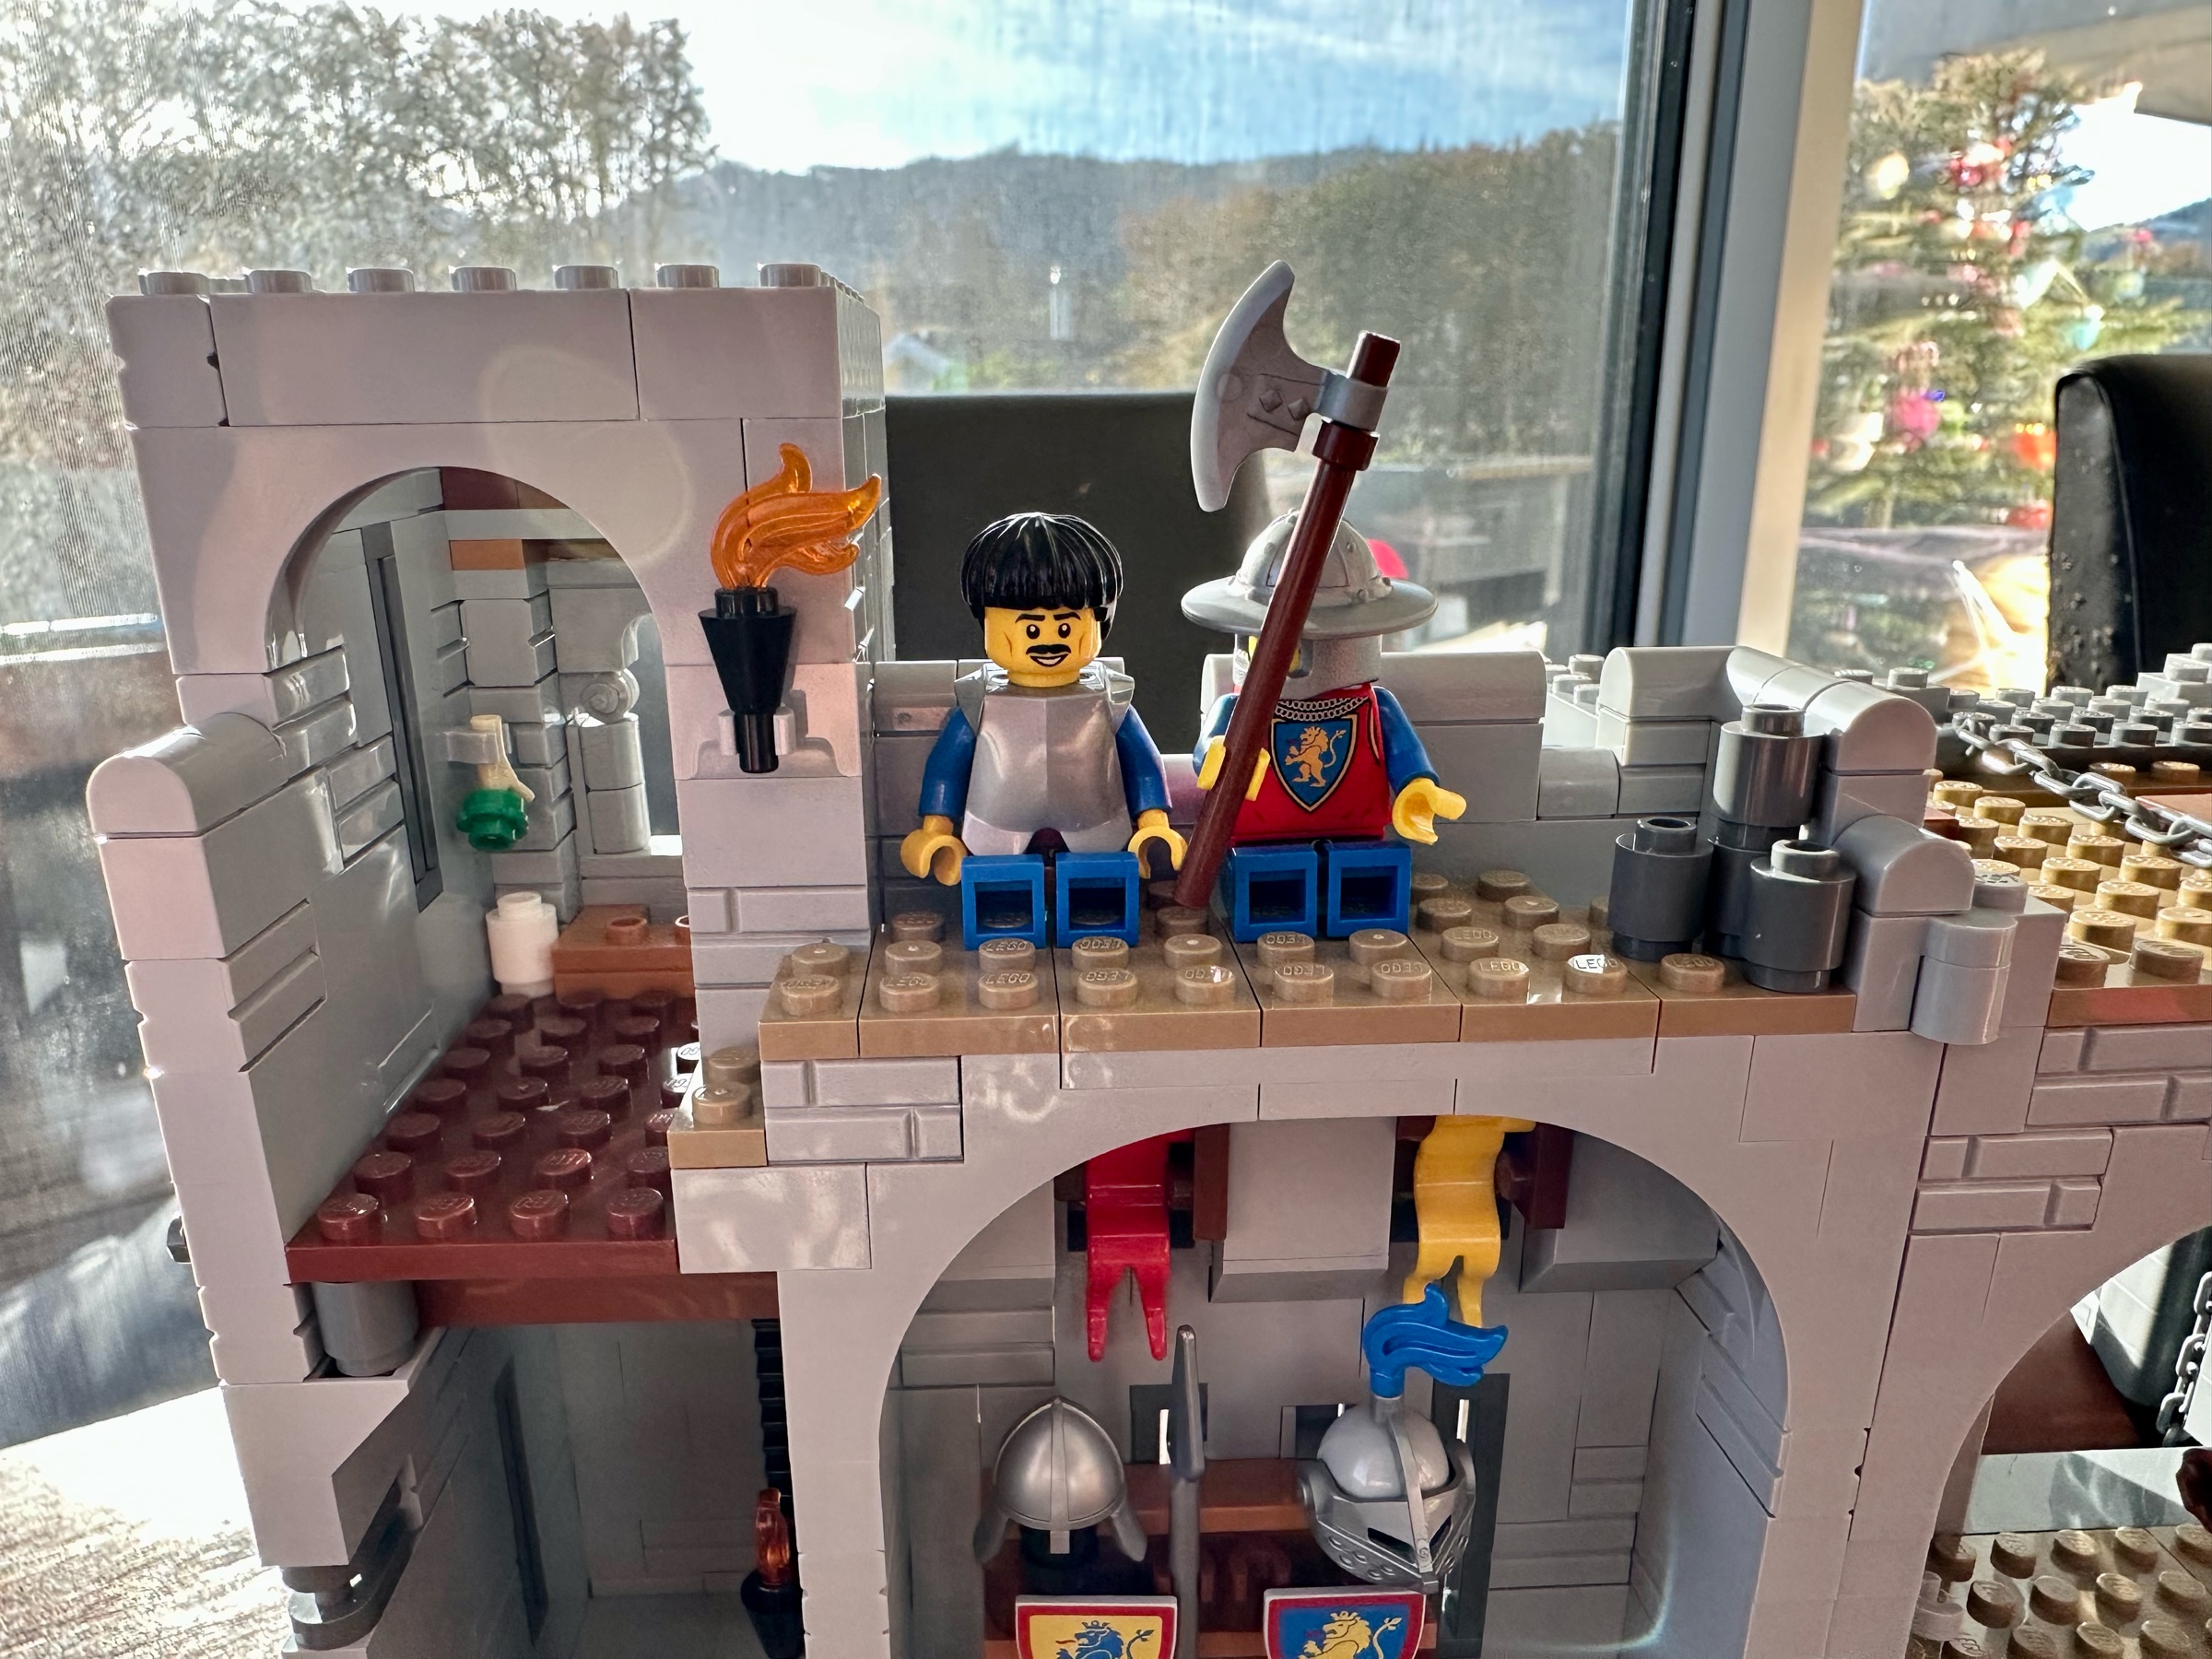 LEGO castle parapet with a latrine on the left. Two guards sit on the parapet with their backs to the wall. A pile of stones to drop through the murder holes is on the right.